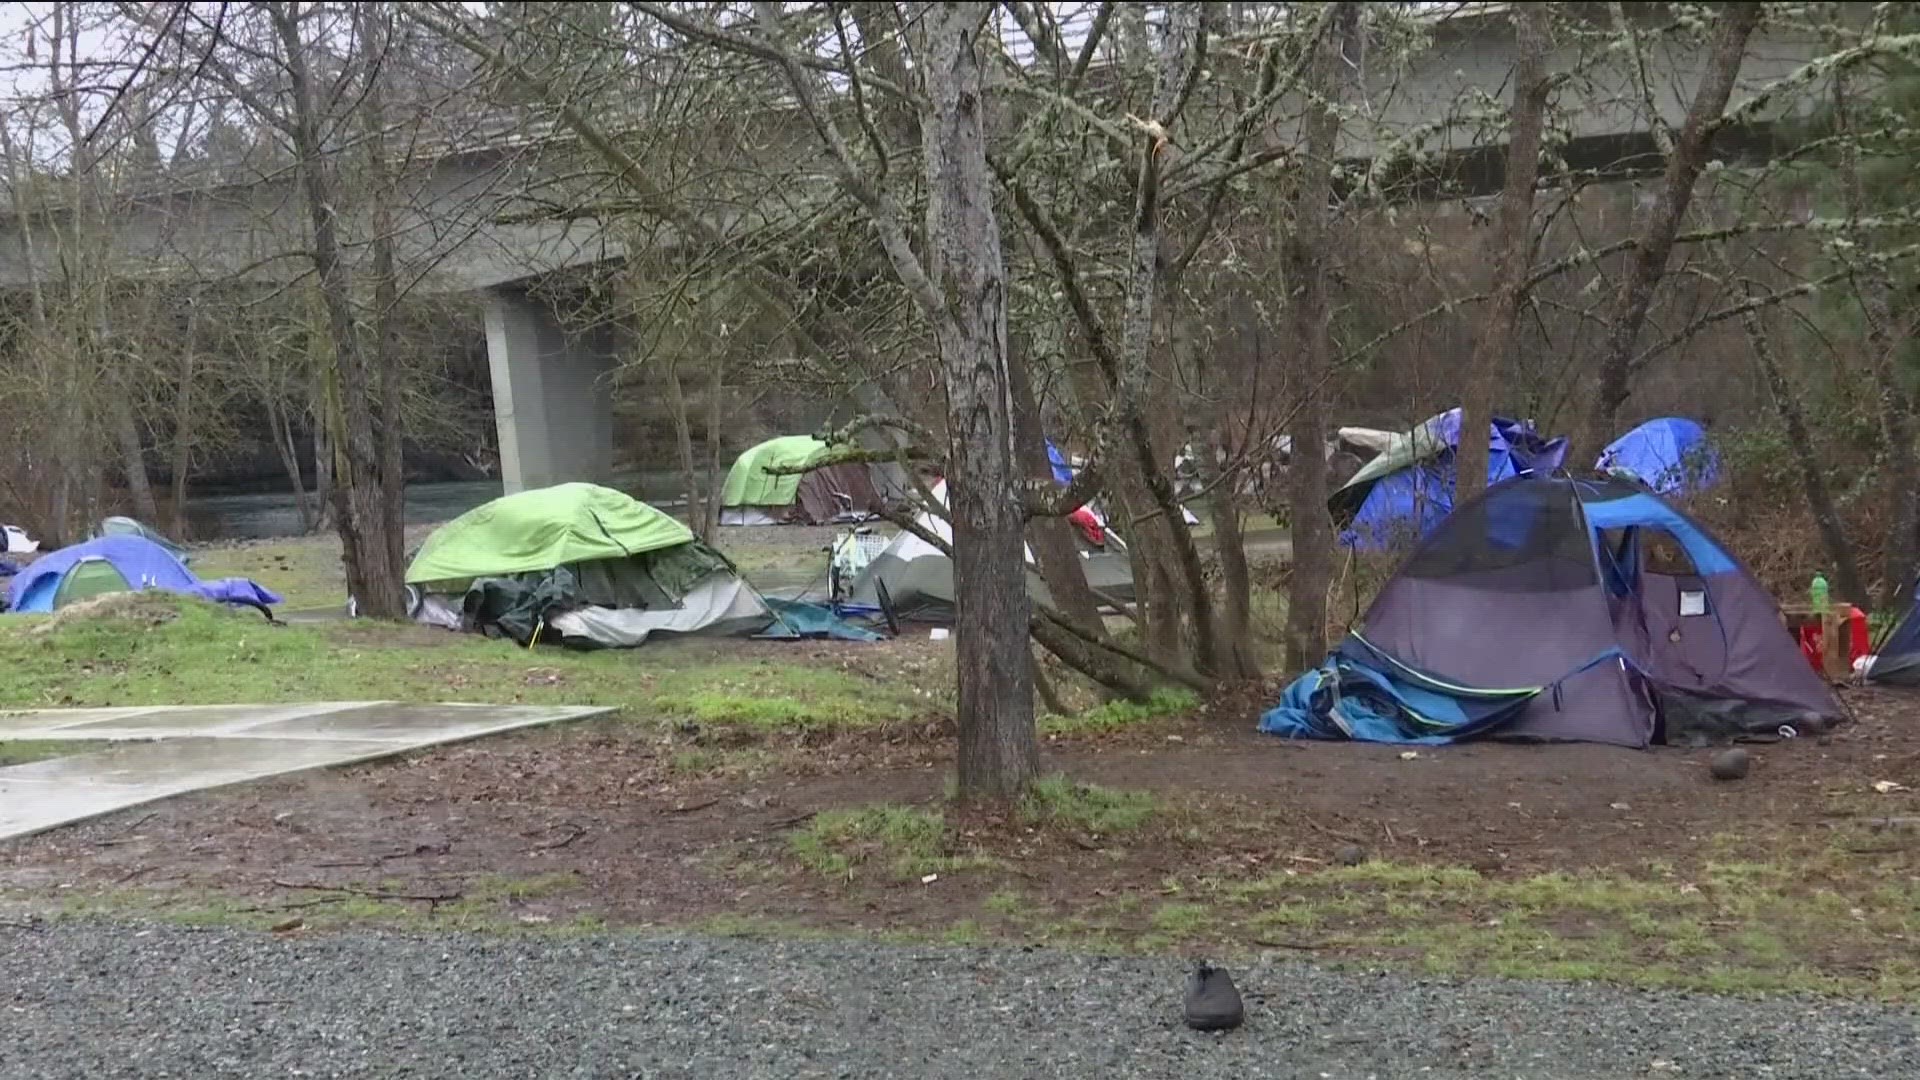 Grants Pass banned camping on public property and they're ticketing homeless people for it. The 9th Circuit is challenging that, citing 2018 Martin v Boise decision.